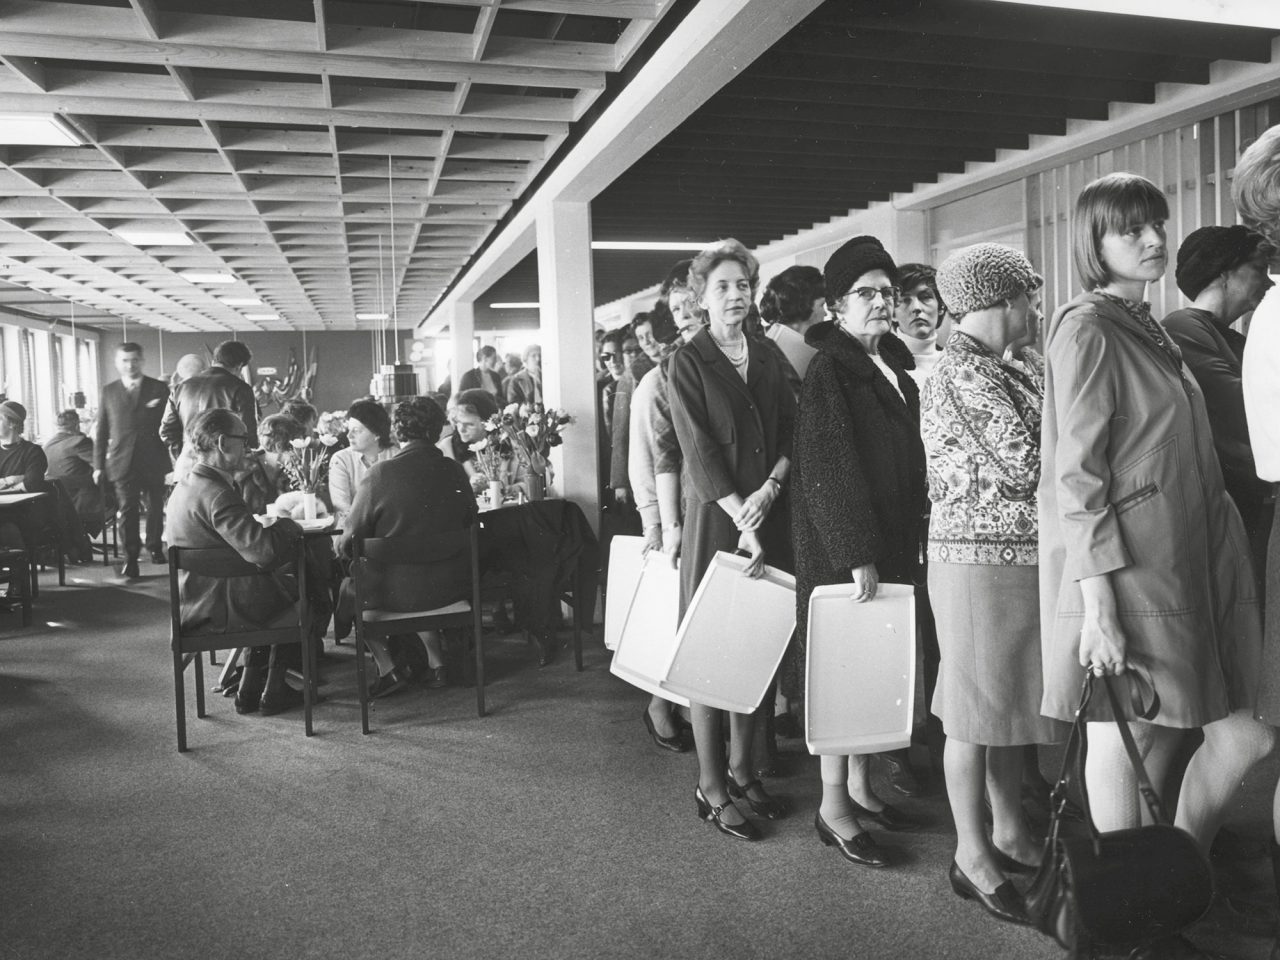 Women of different ages, dressed in 1960s style, stand in a restaurant queue holding trays.